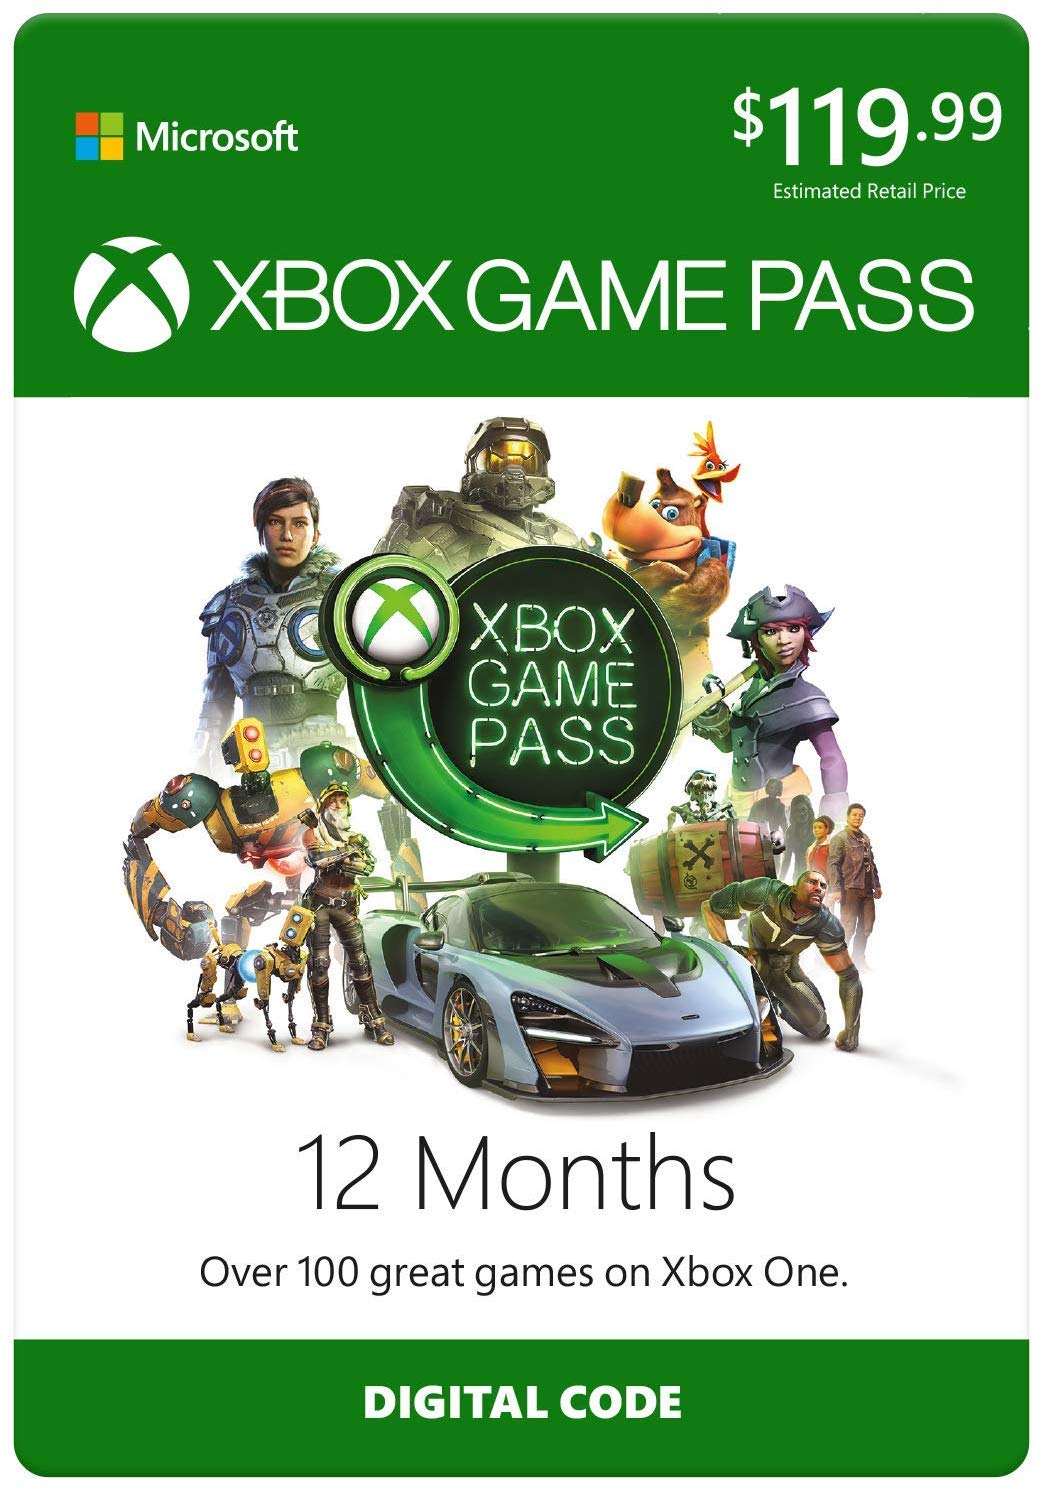 Xbox Game Pass 12-month subscription